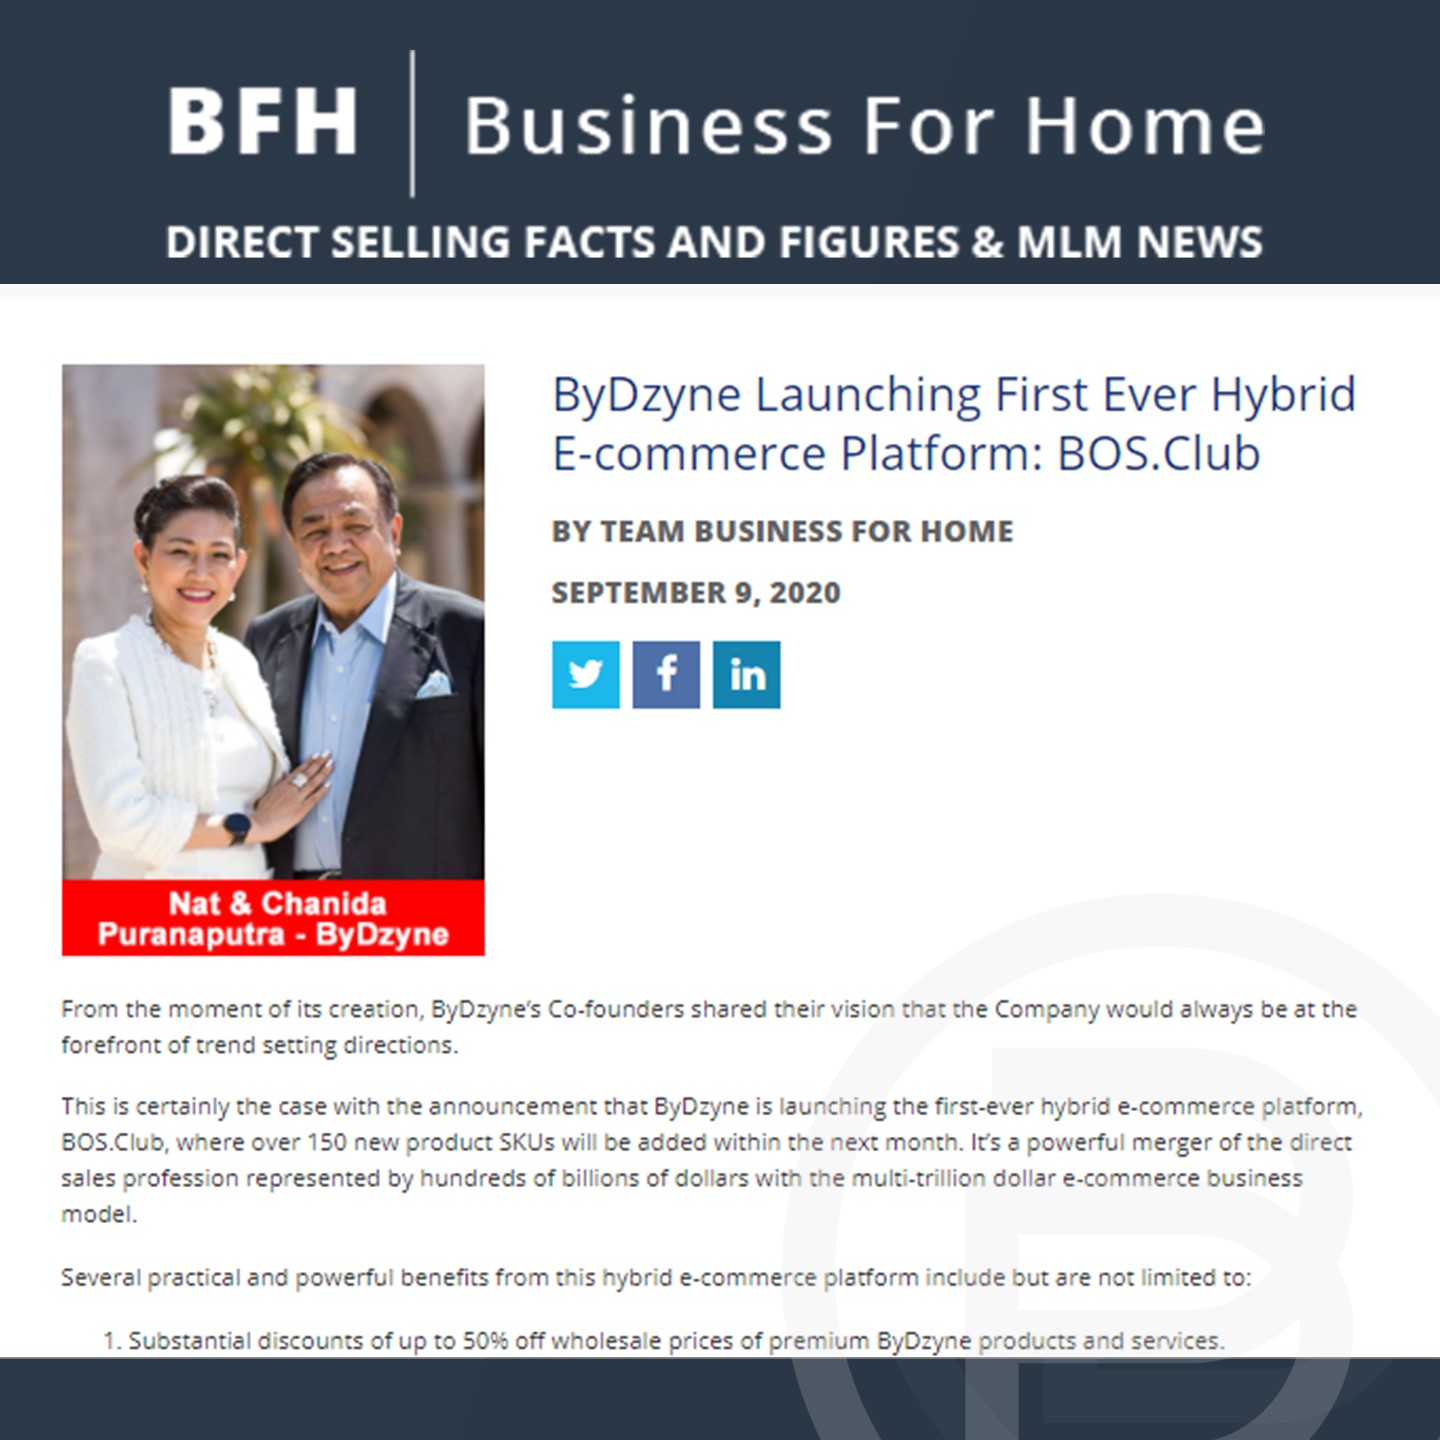 BFH: ByDzyne Launching First Ever Hybrid E-commerce Platform: BOS.Club